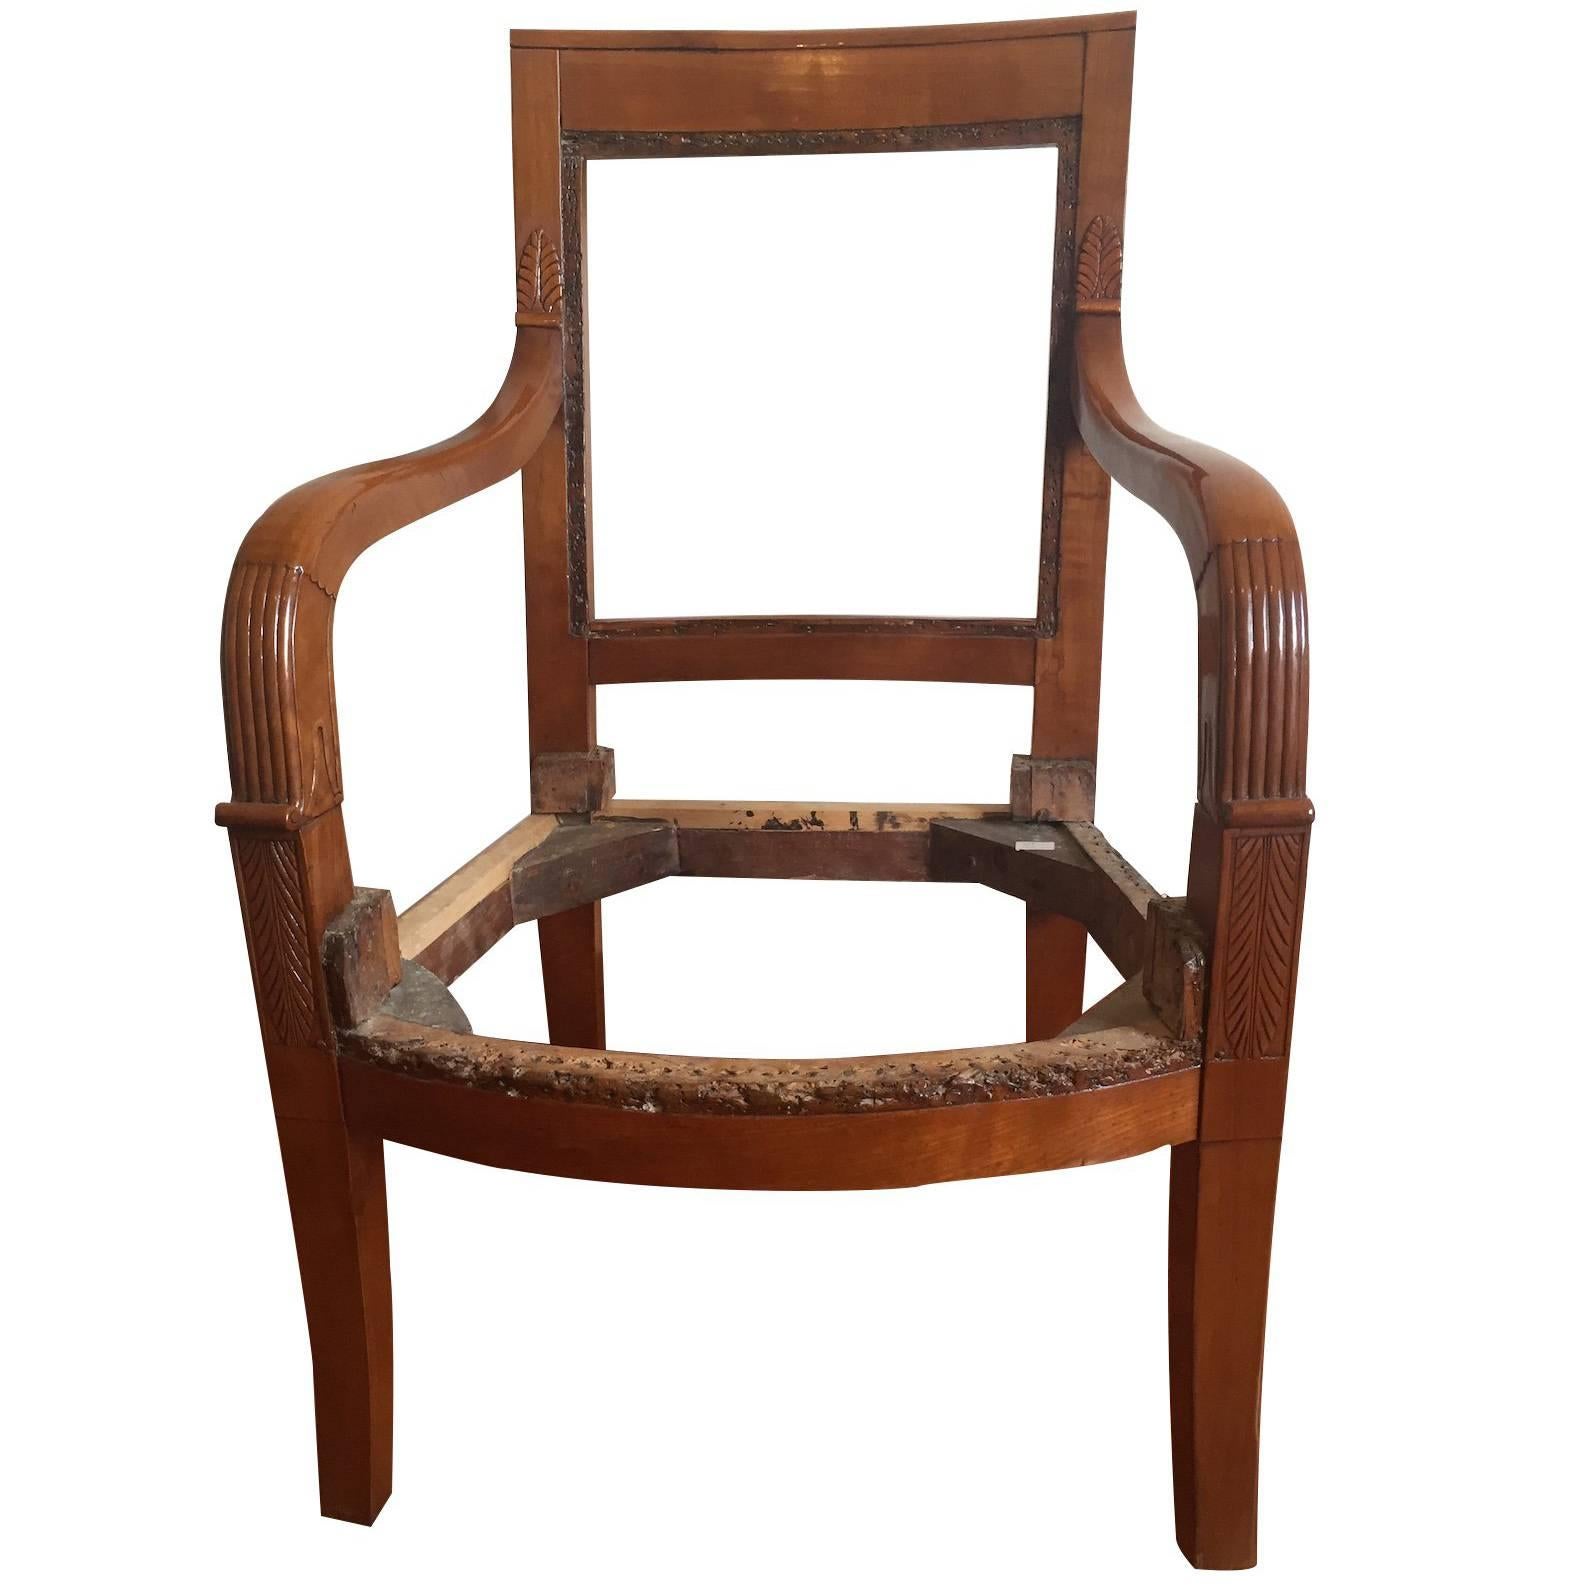 Fine quality French Empire cherrywood armchairs.
Carved arms in shallow relief with acanthus leaves, elegant saber legs, beautiful patina color.
To coat however you like.